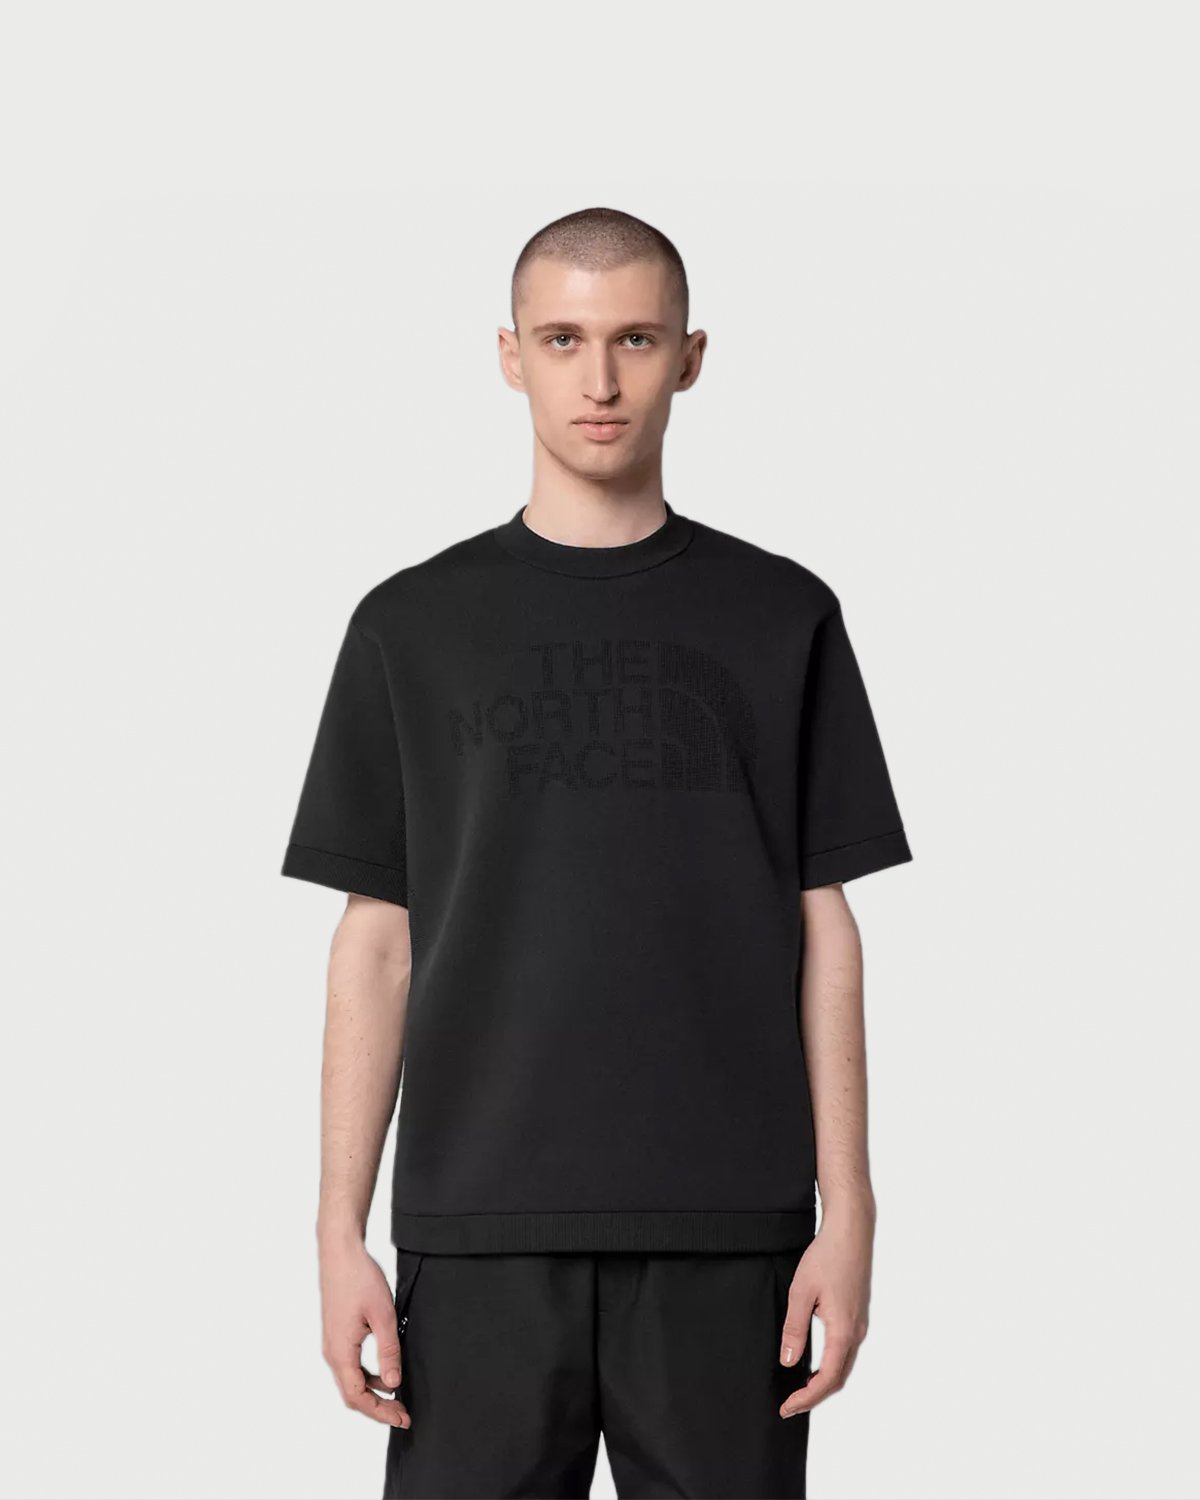 The North Face - Black Series Engineered Knit T-Shirt Black - Clothing - Black - Image 4